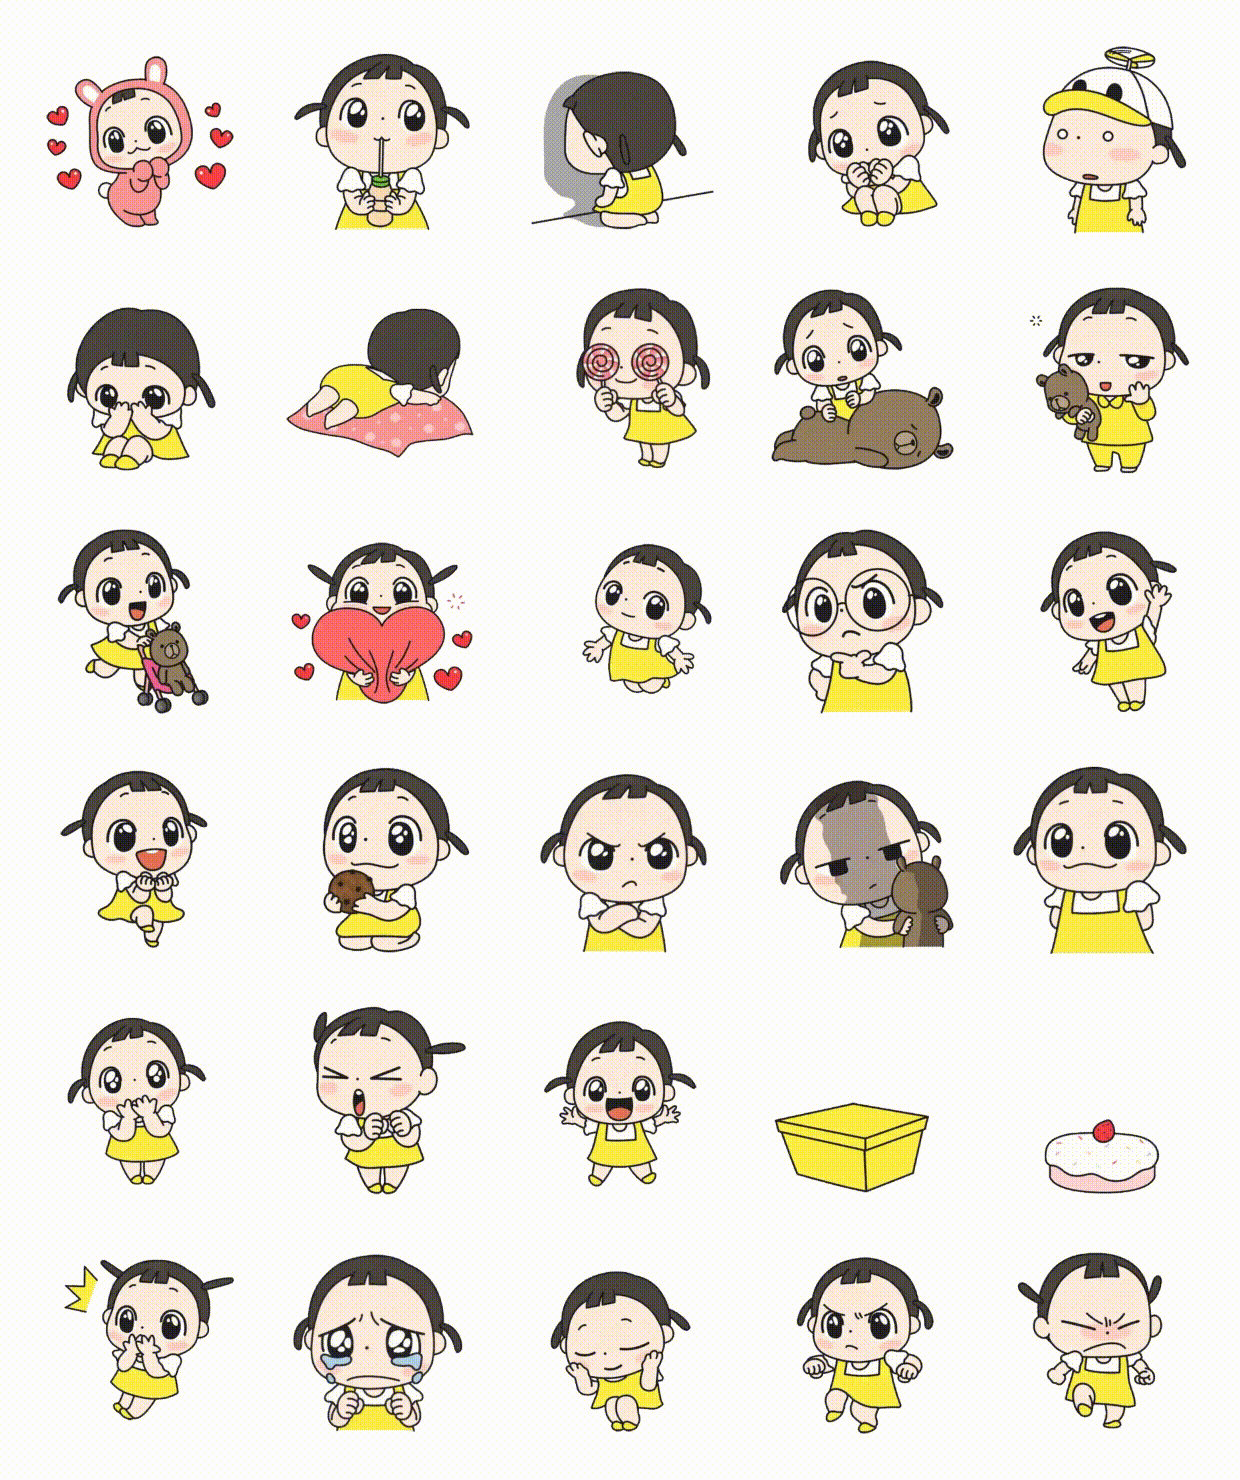 Bomi Animation/Cartoon sticker pack for Whatsapp, Telegram, Signal, and others chatting and message apps